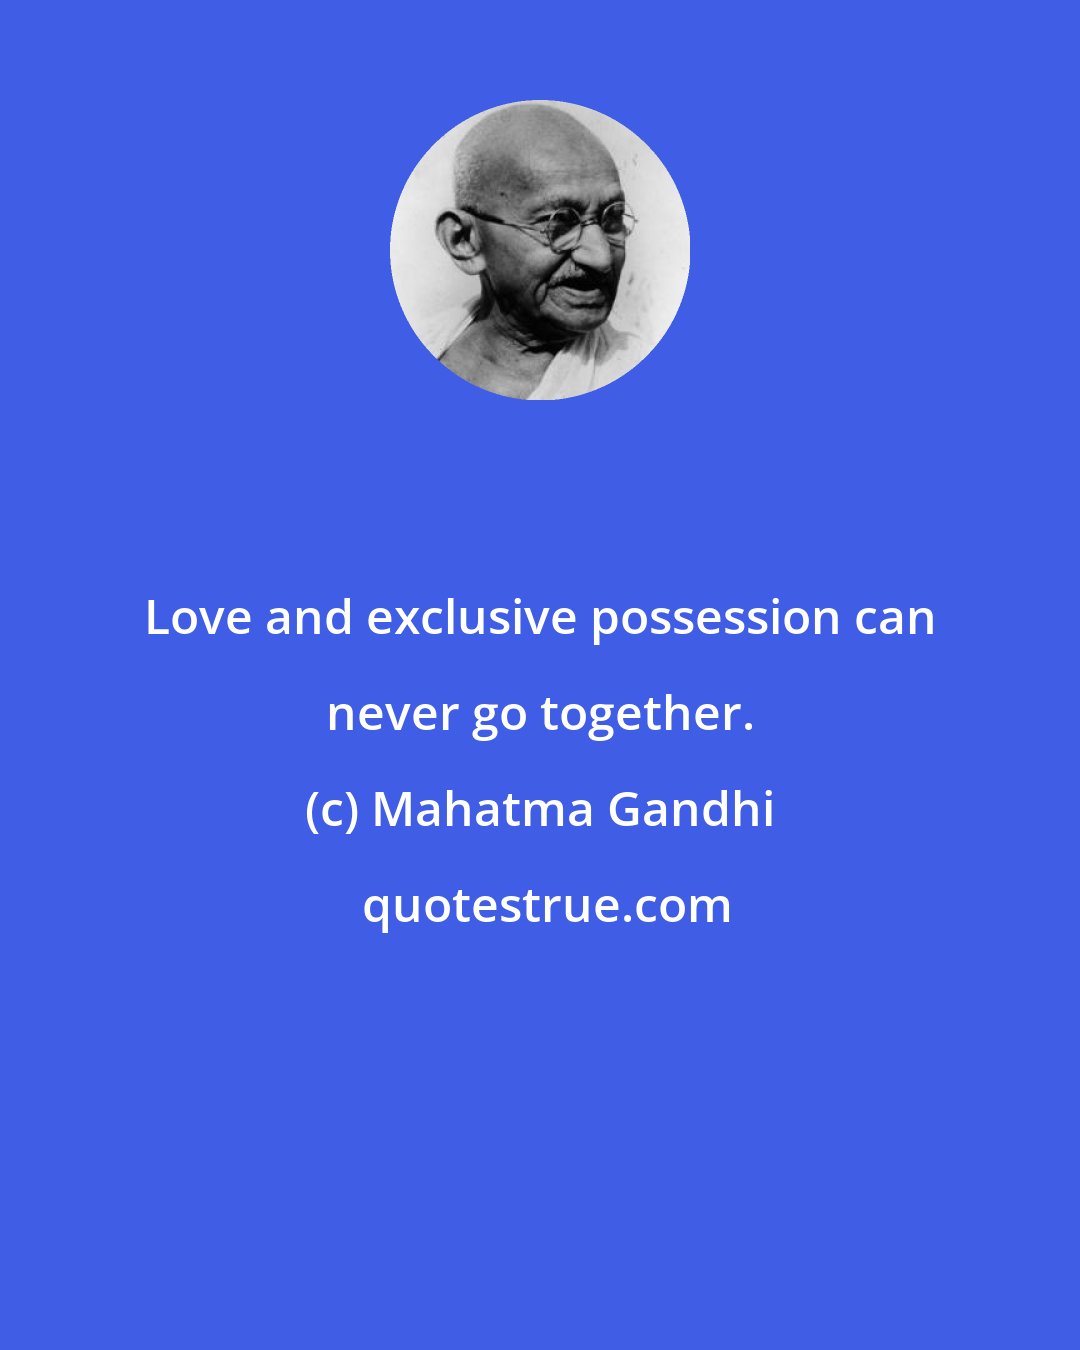 Mahatma Gandhi: Love and exclusive possession can never go together.